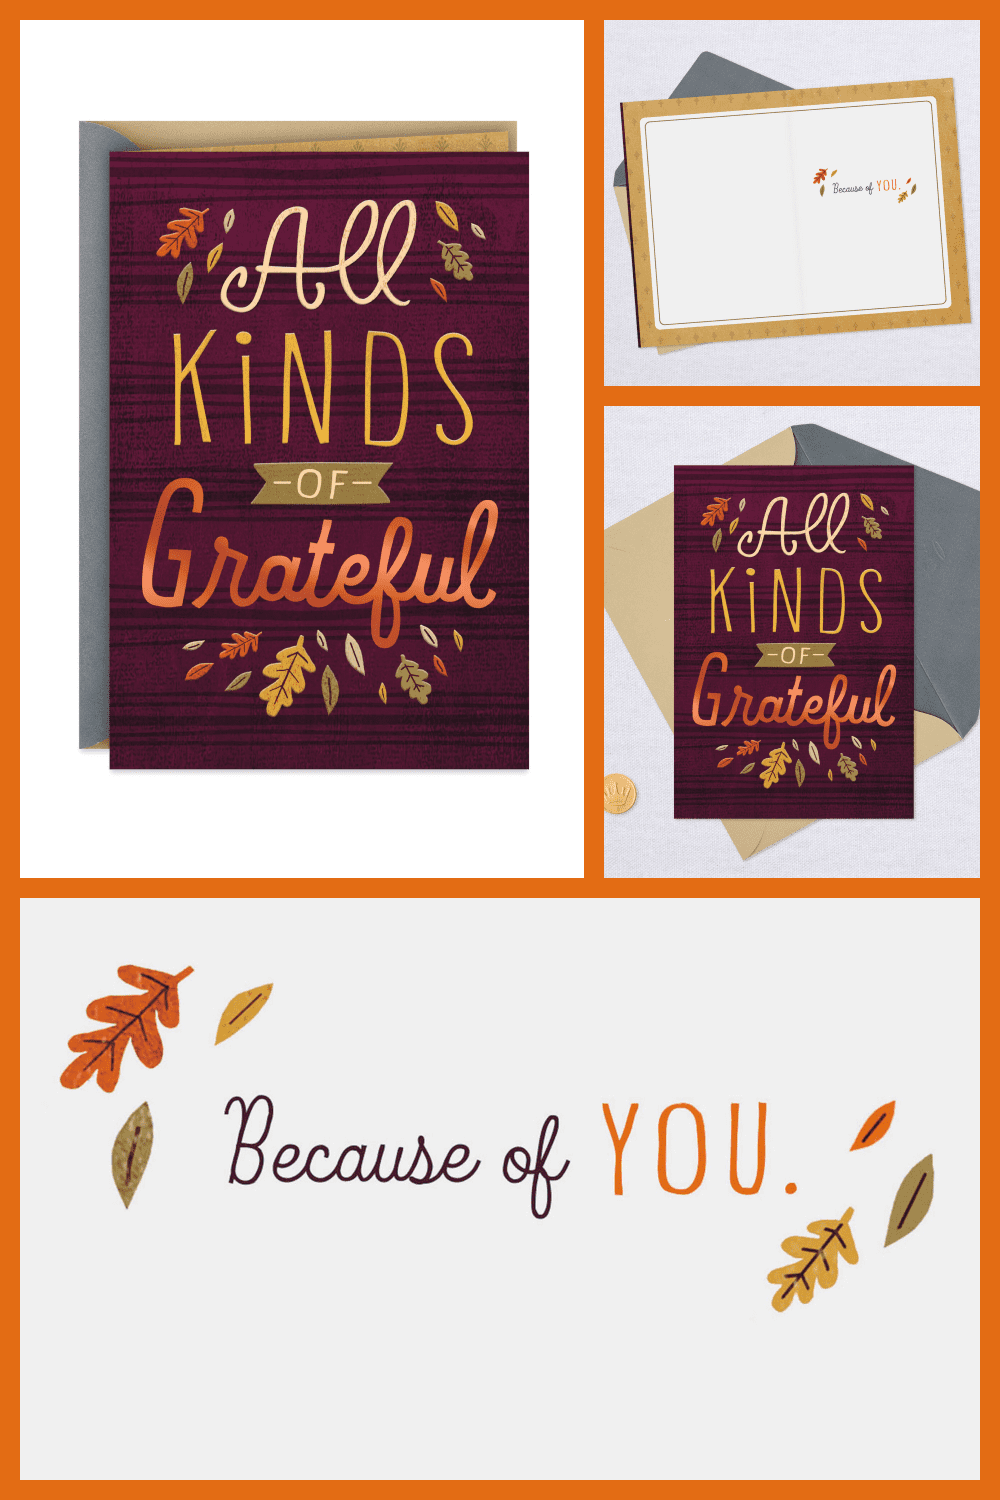 All kinds of grateful thanksgiving card.